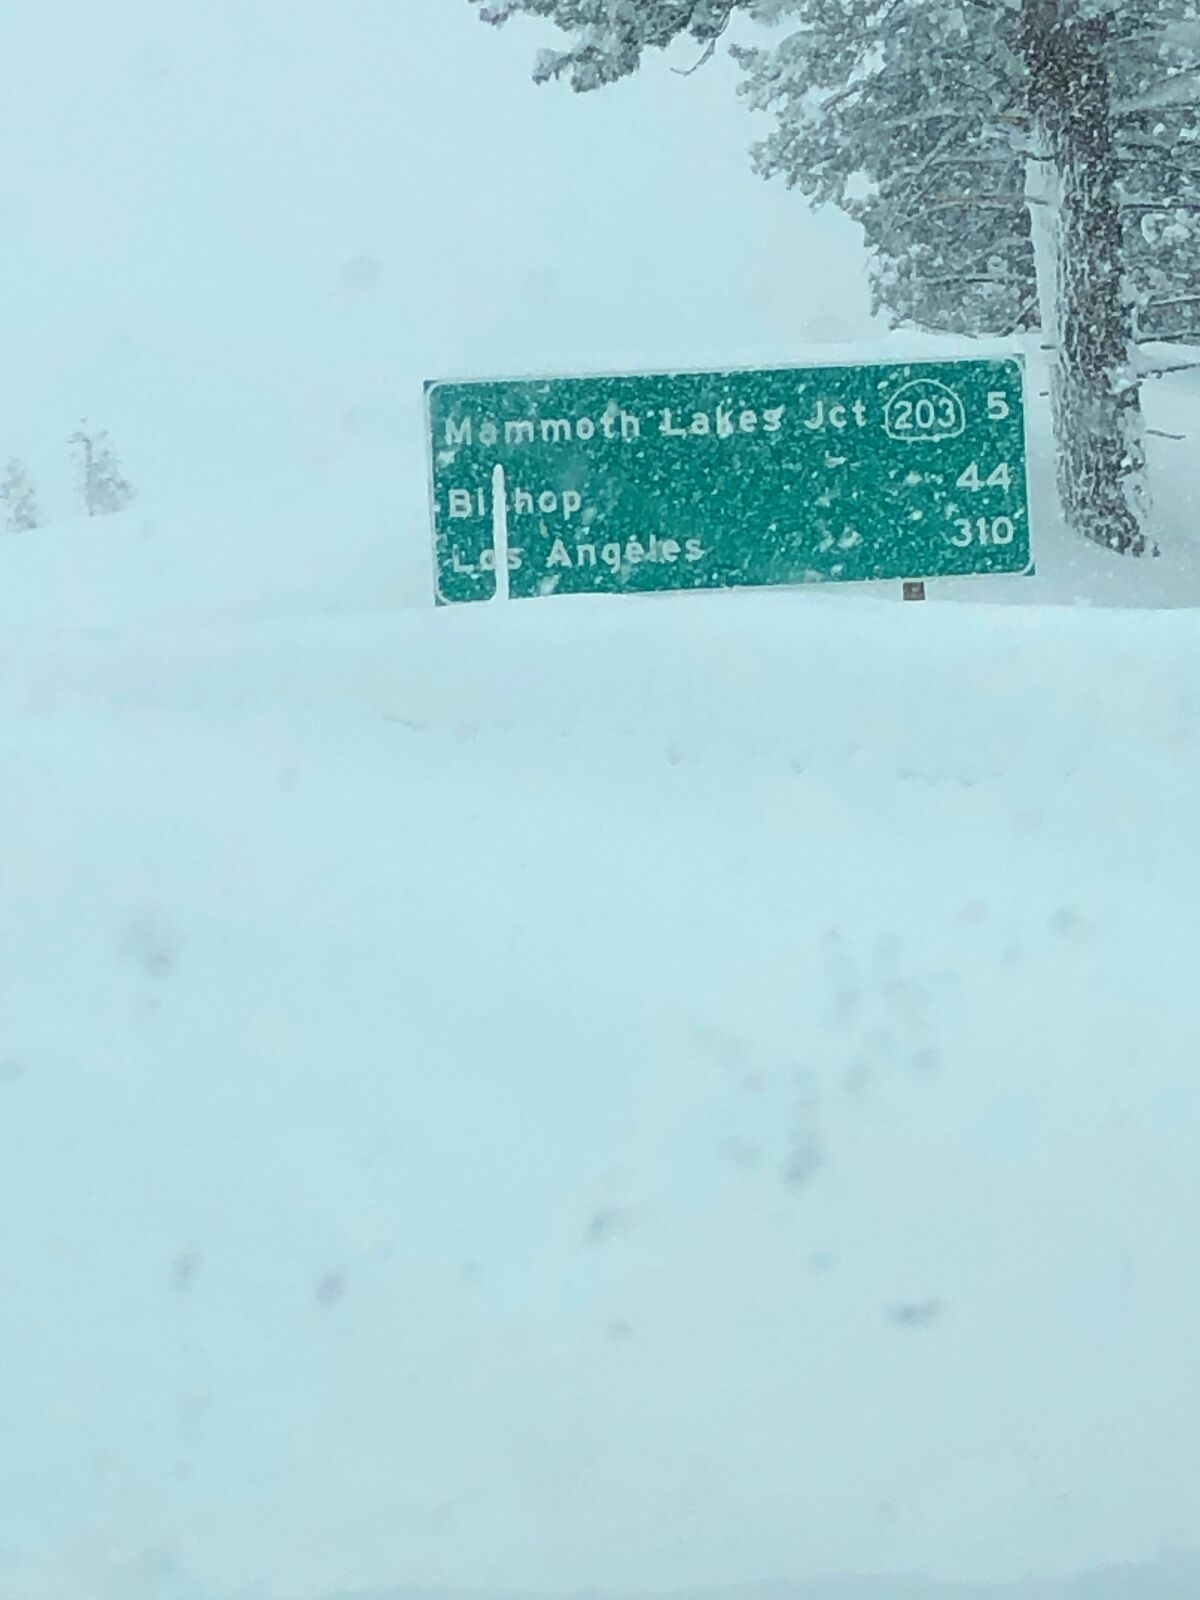 U.S. Hwy 395 is closed in Mono County due to the heavy snowfall.